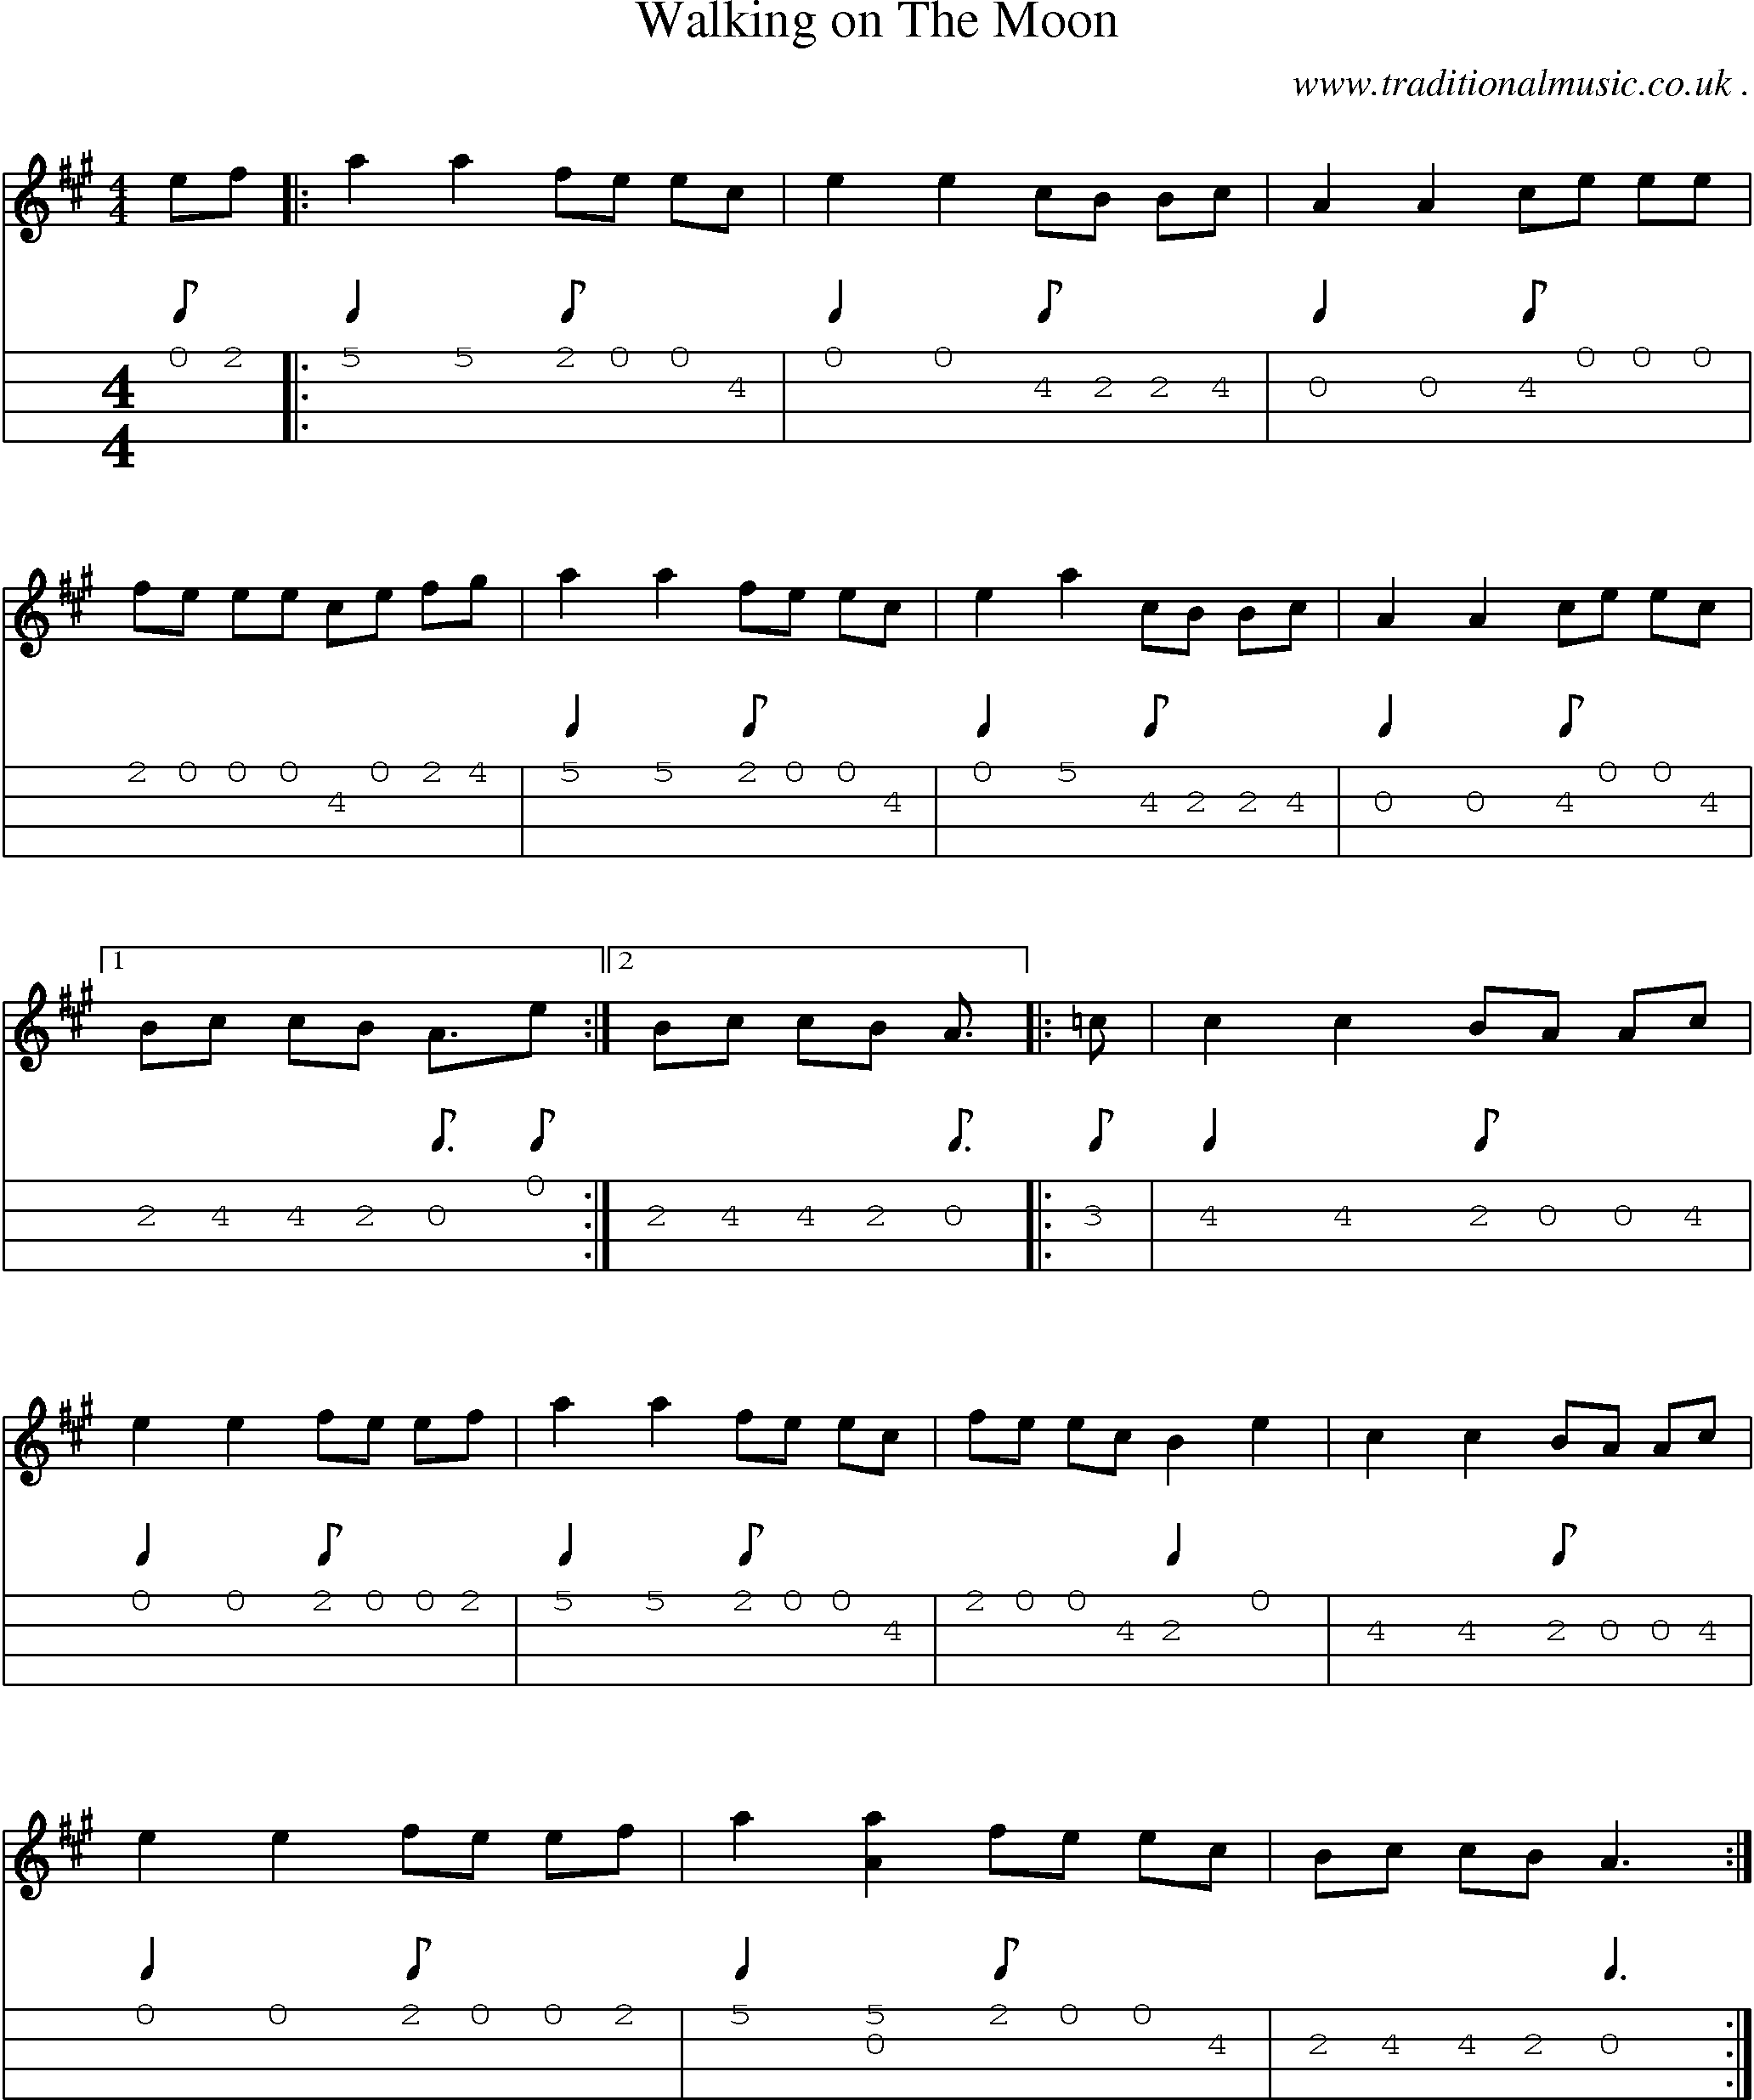 Sheet-music  score, Chords and Mandolin Tabs for Walking On The Moon